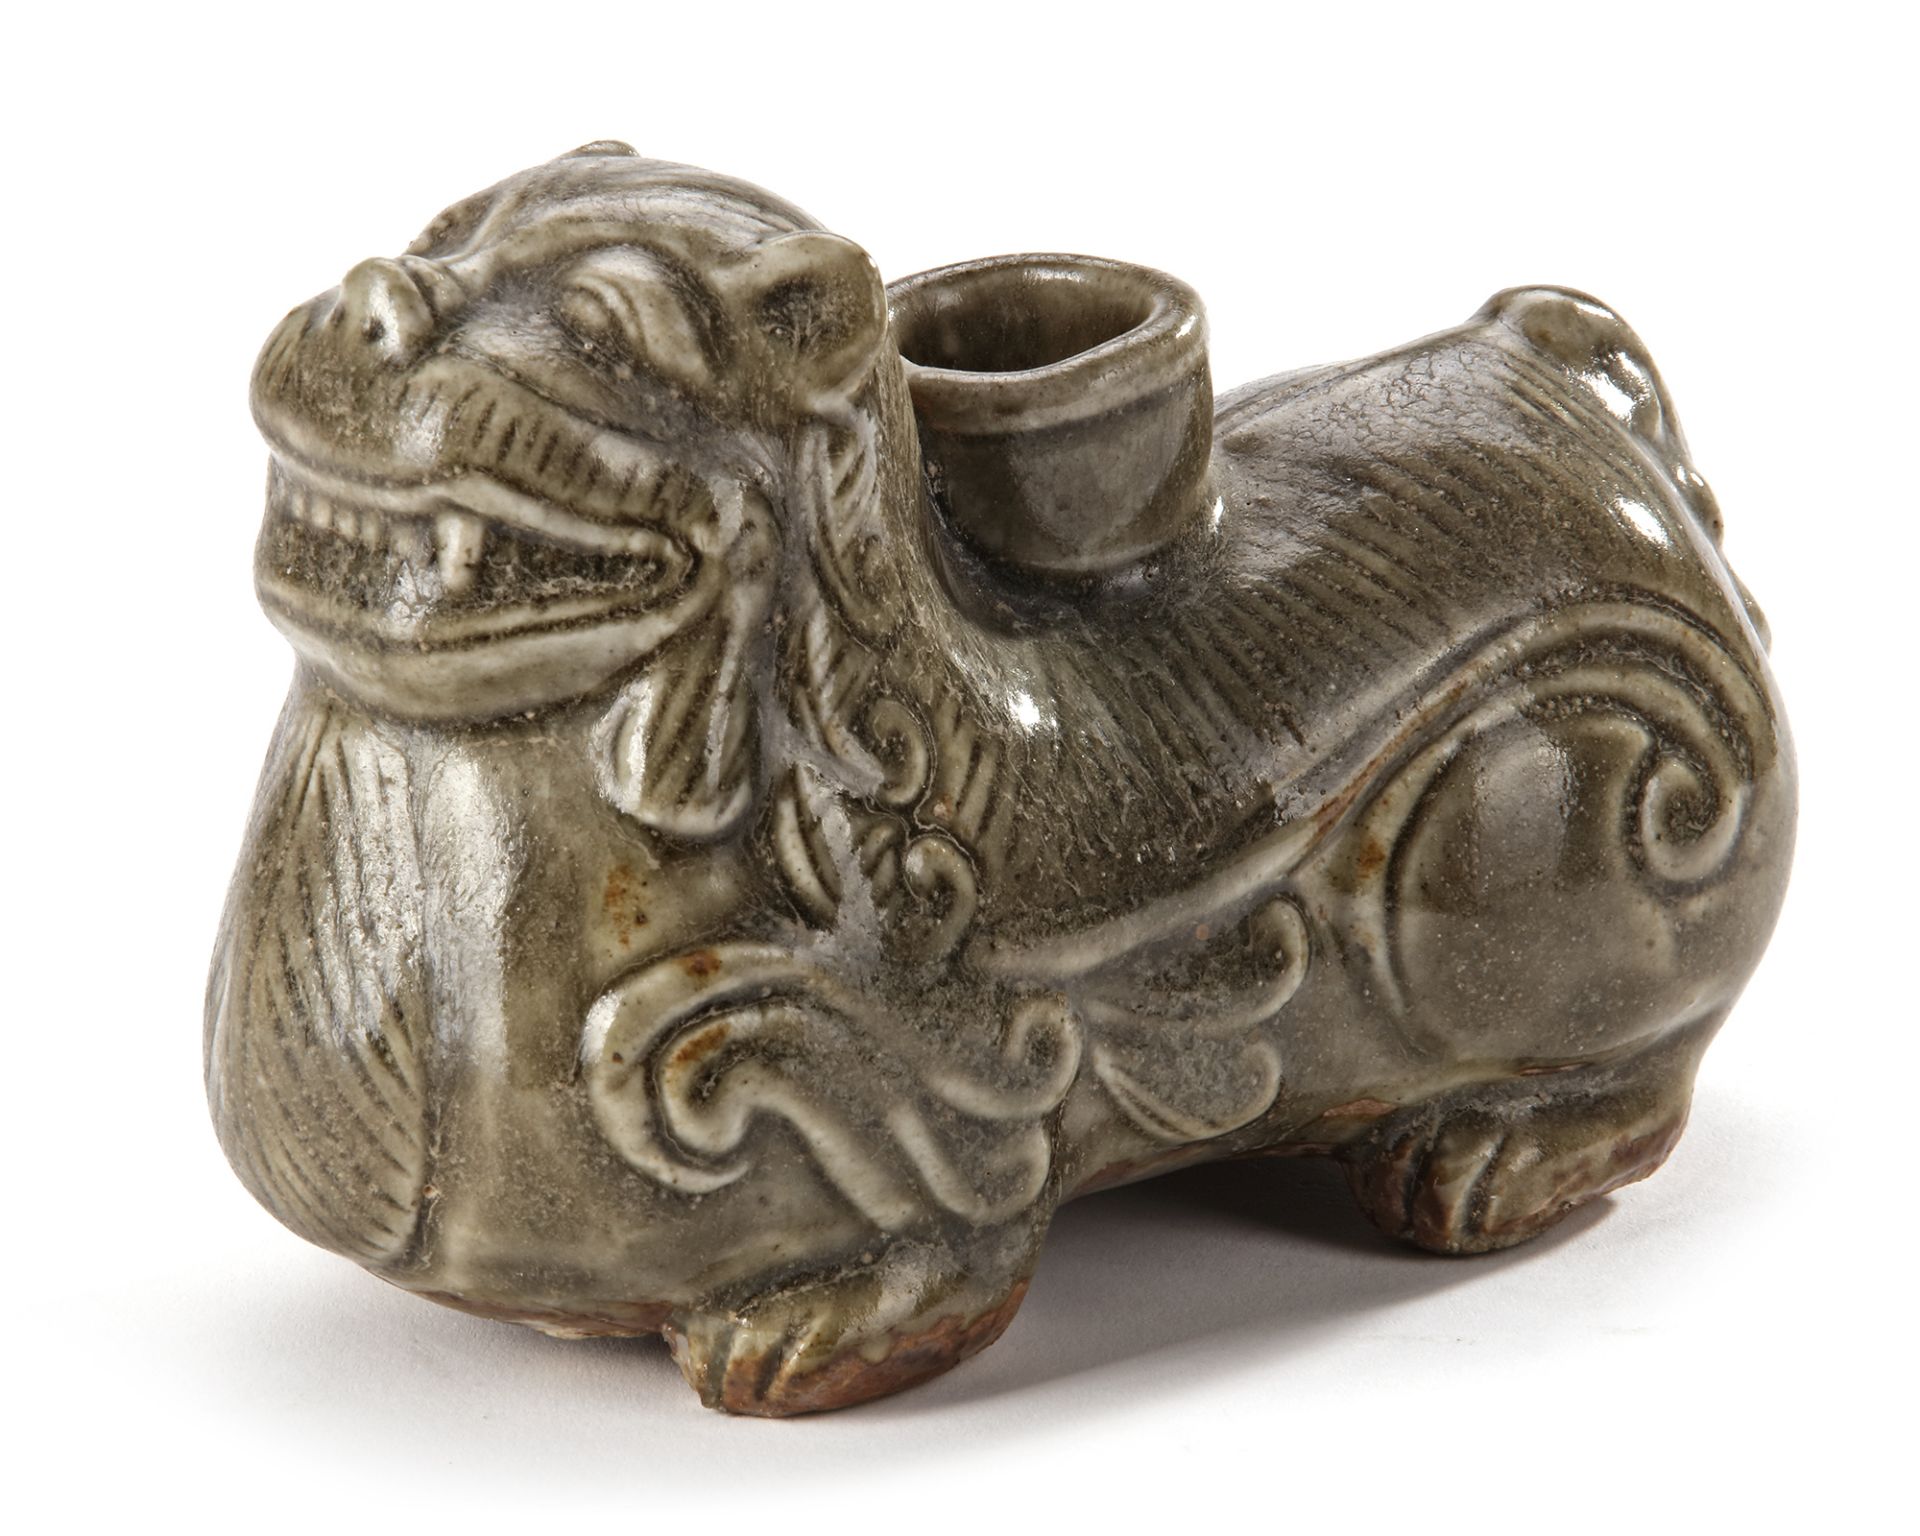 A CHINESE YUEYAO ZOOMORPHIC VESSEL, WESTERN JIN DYNASTY (265-317) - Image 3 of 6